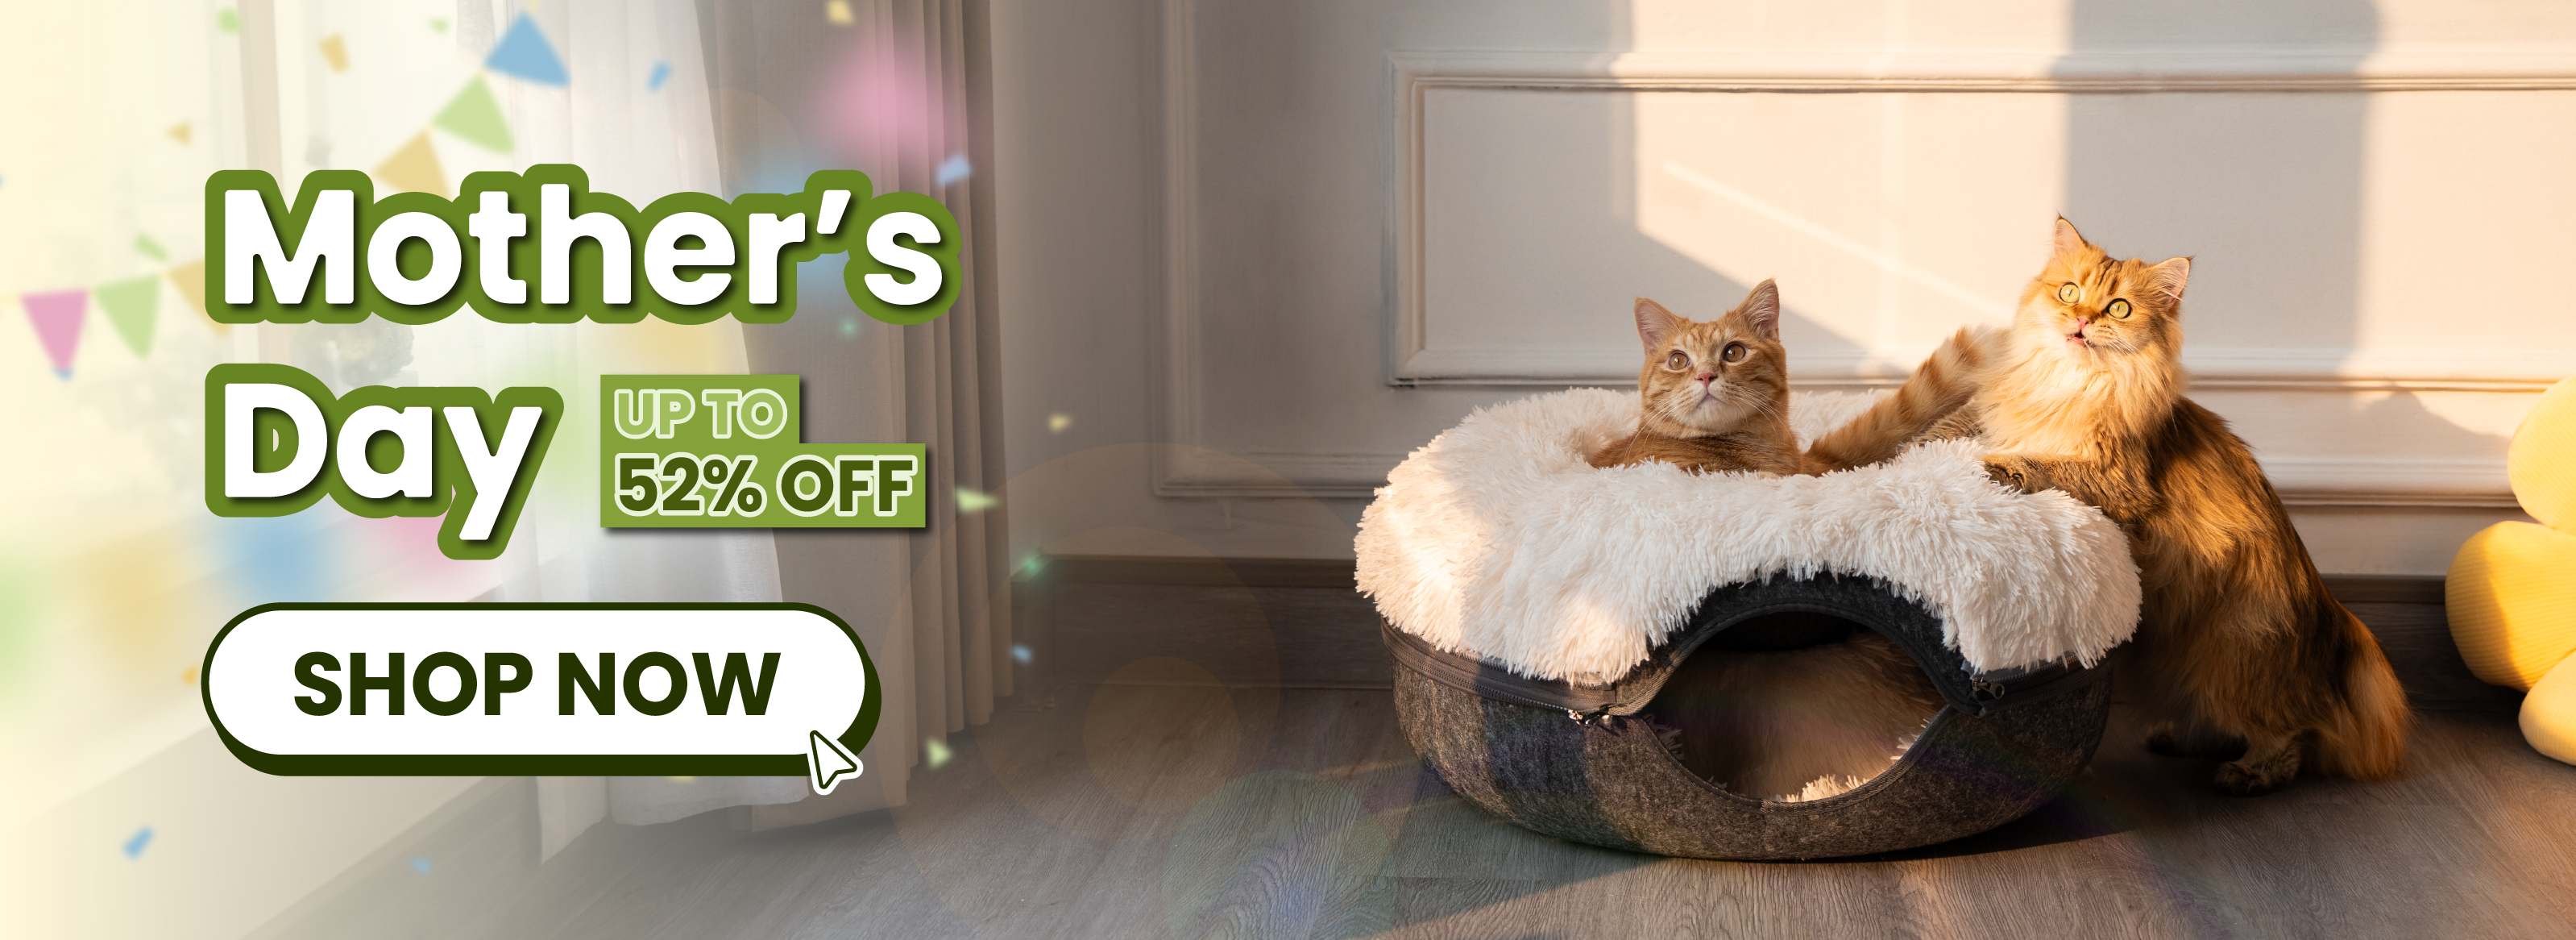 Two cats sitting in a pet bed with a 'Mother's Day Sale' advertisement.